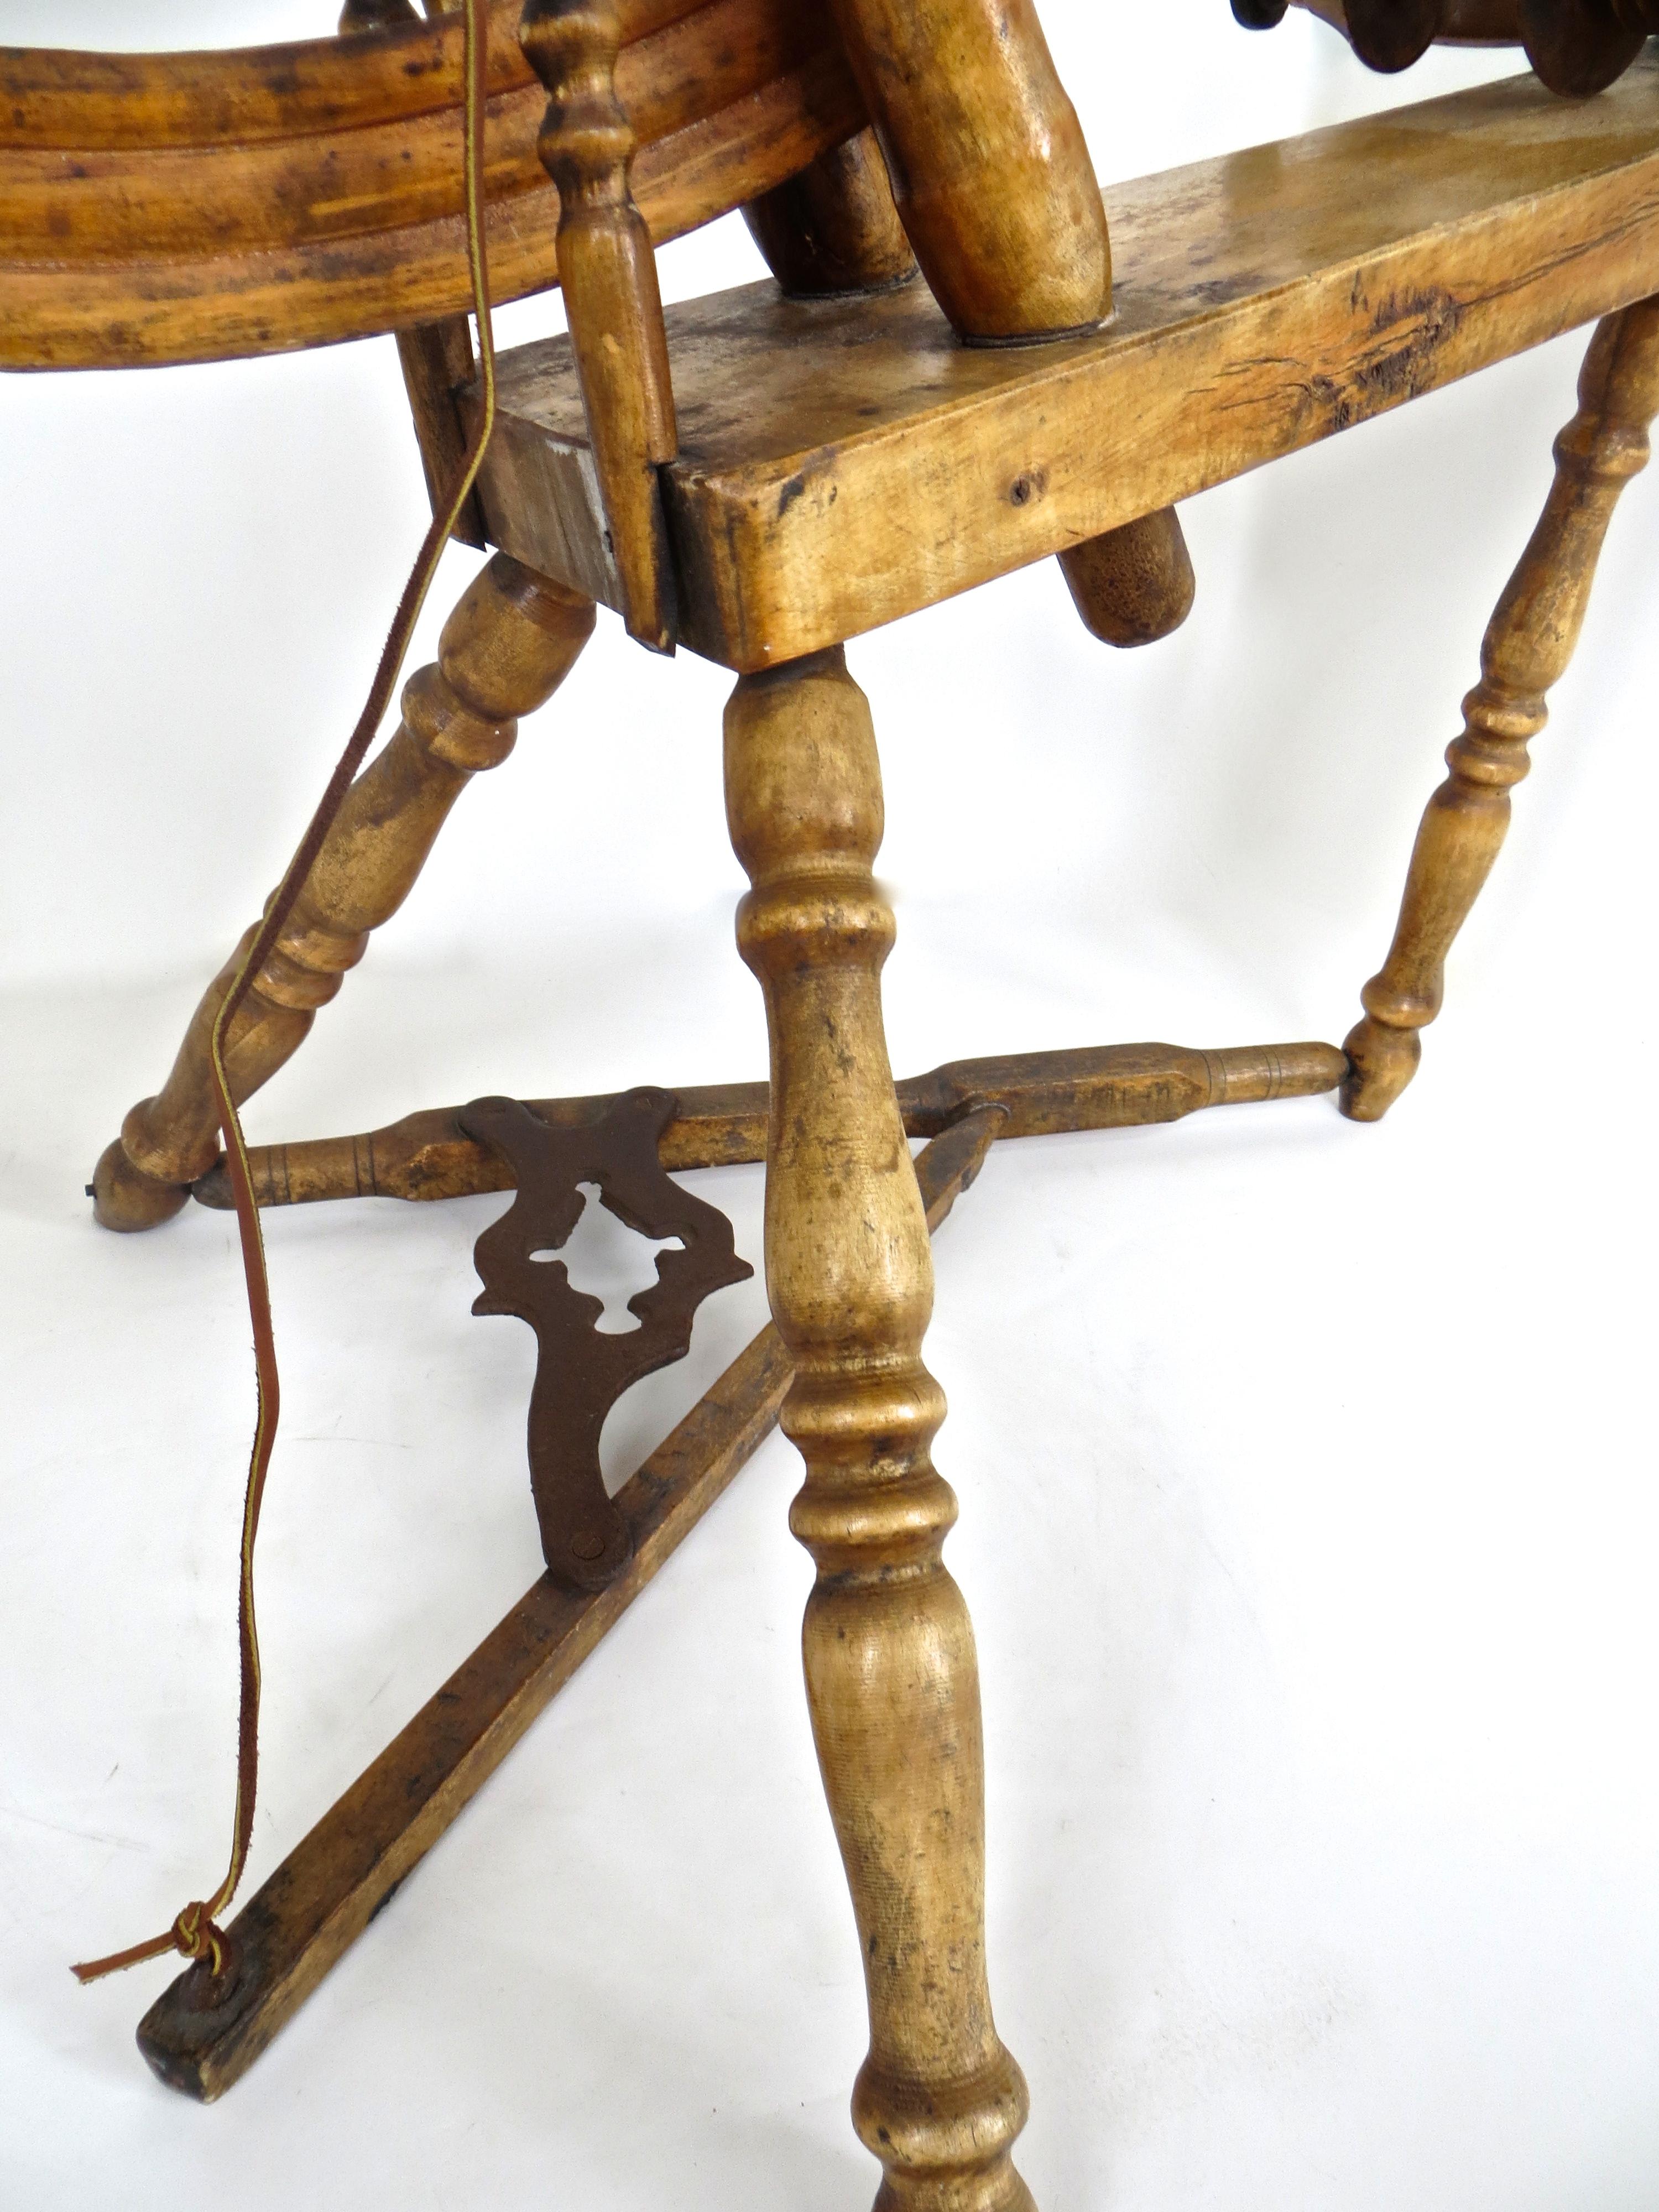 Iron Mid-19th Century American Spinning Wheel For Sale